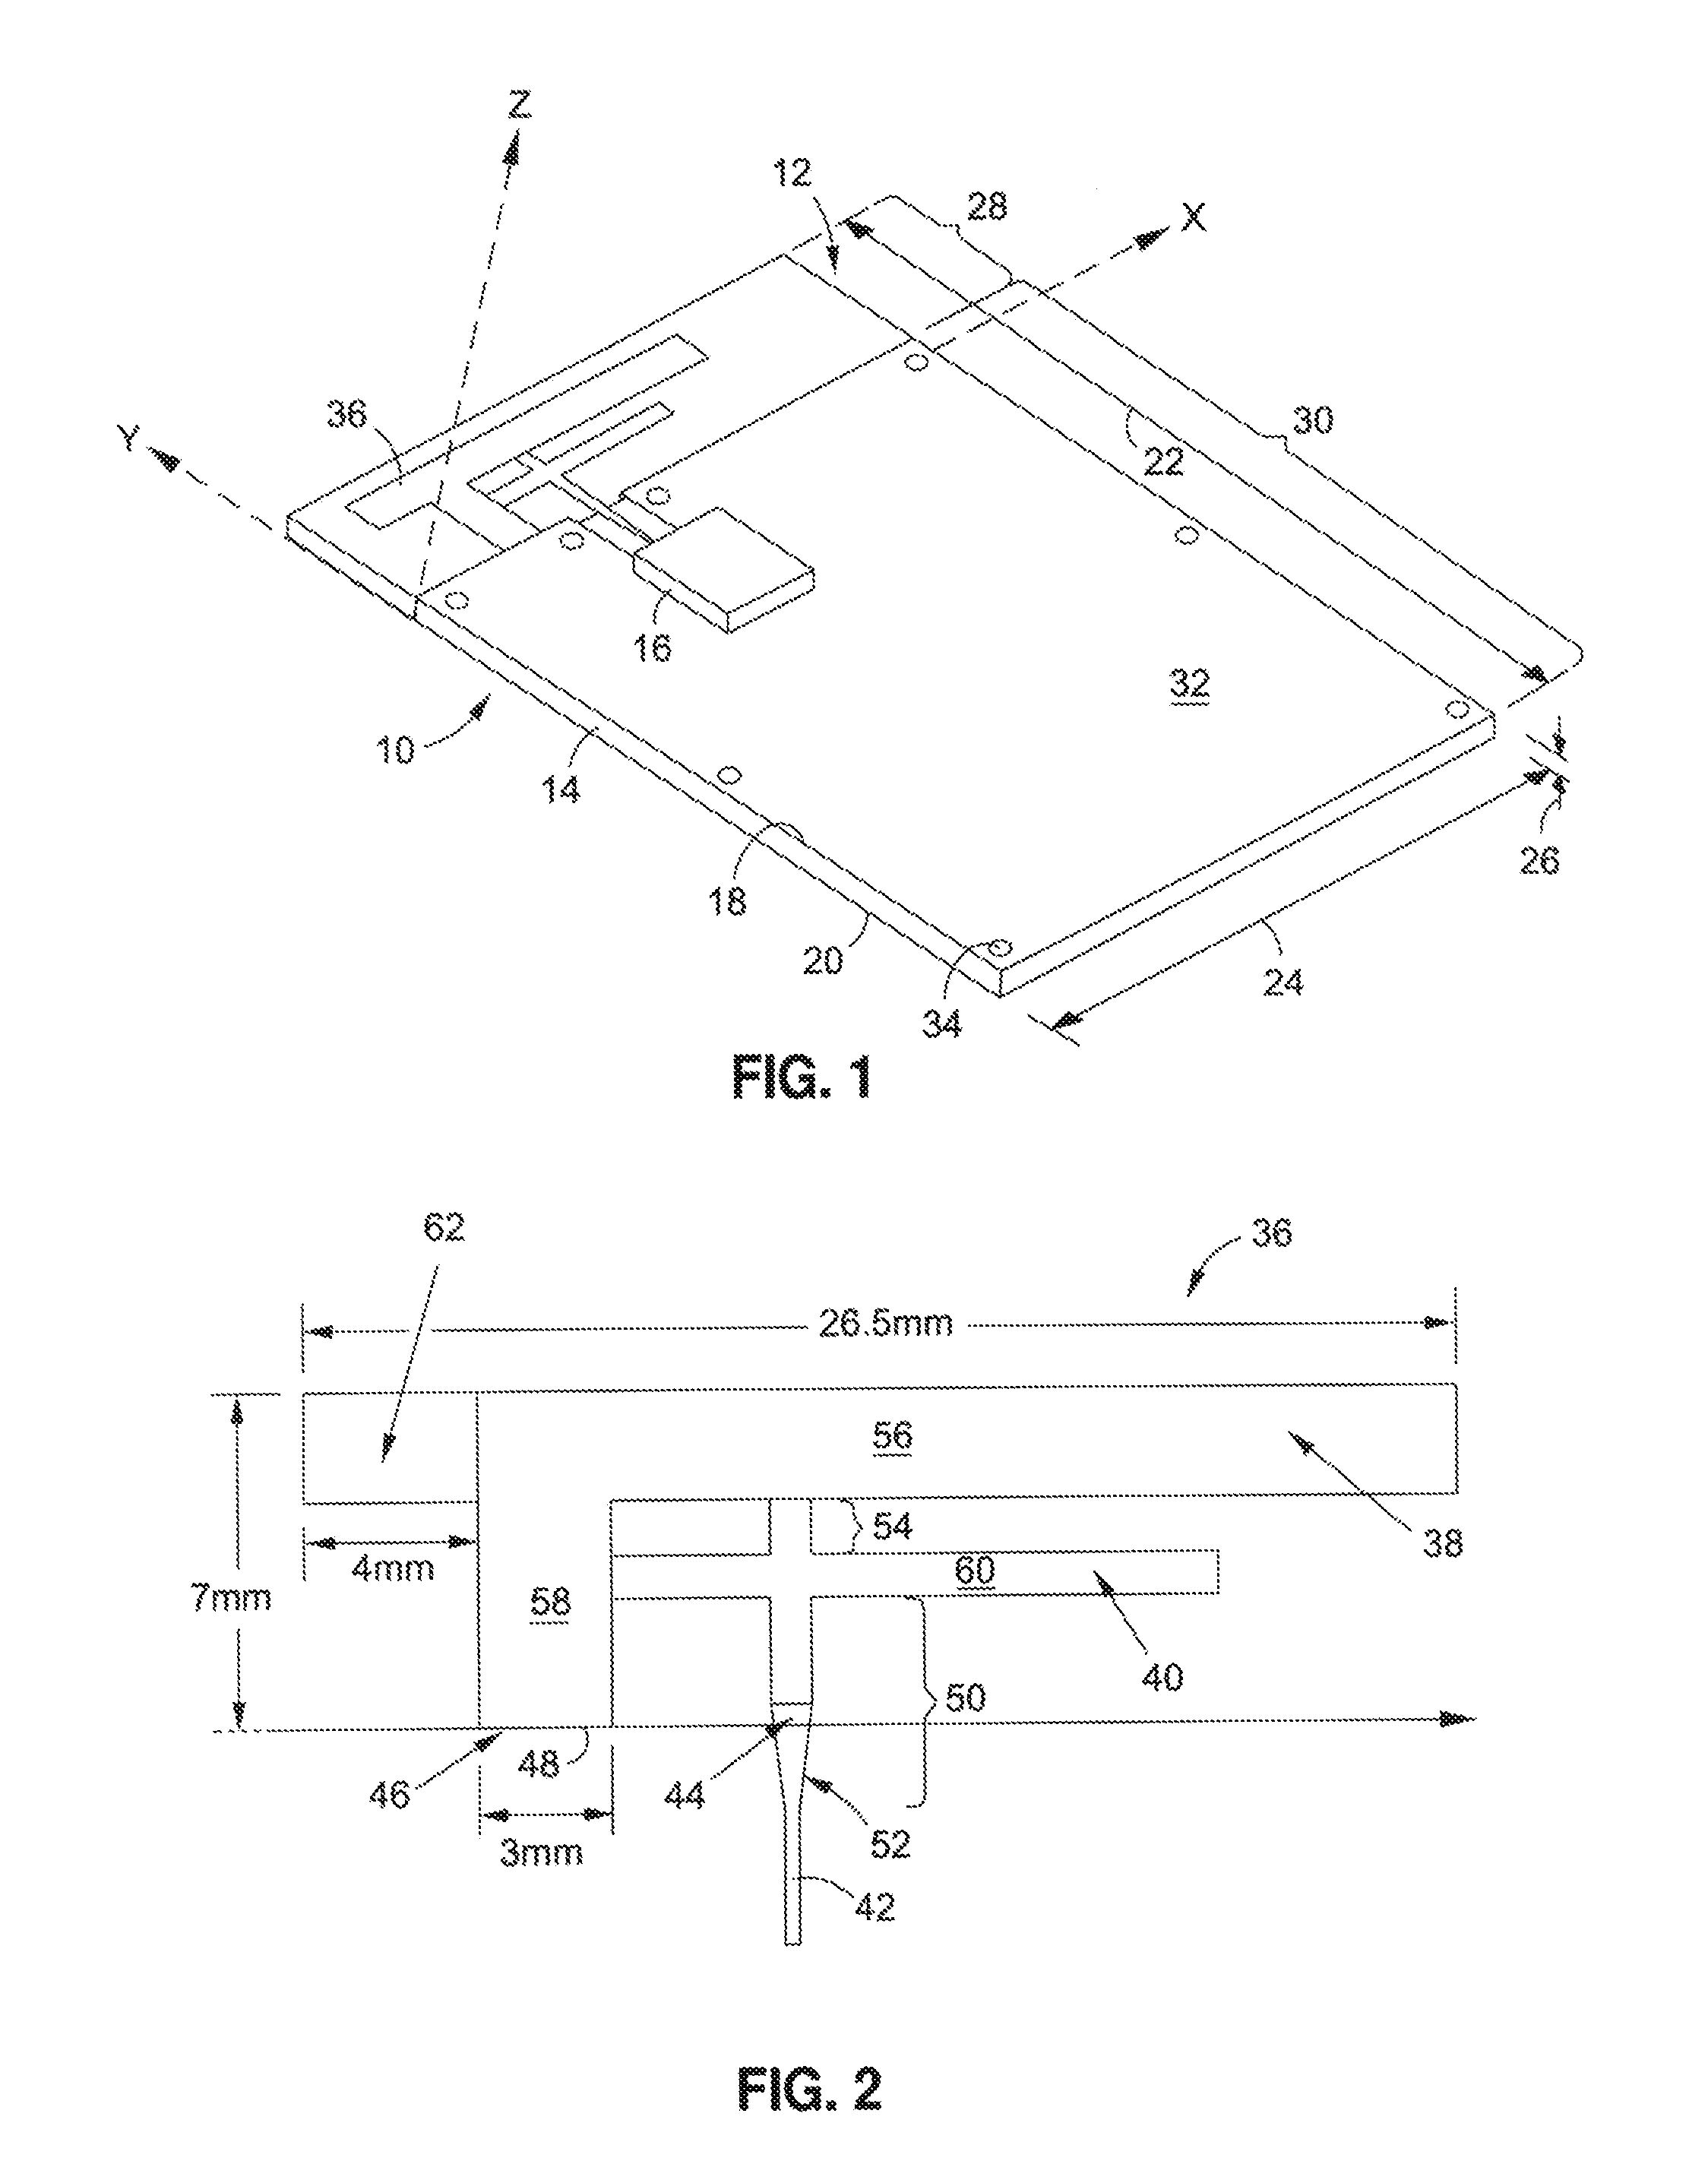 Wideband printed circuit board-printed antenna for radio frequency front end circuit